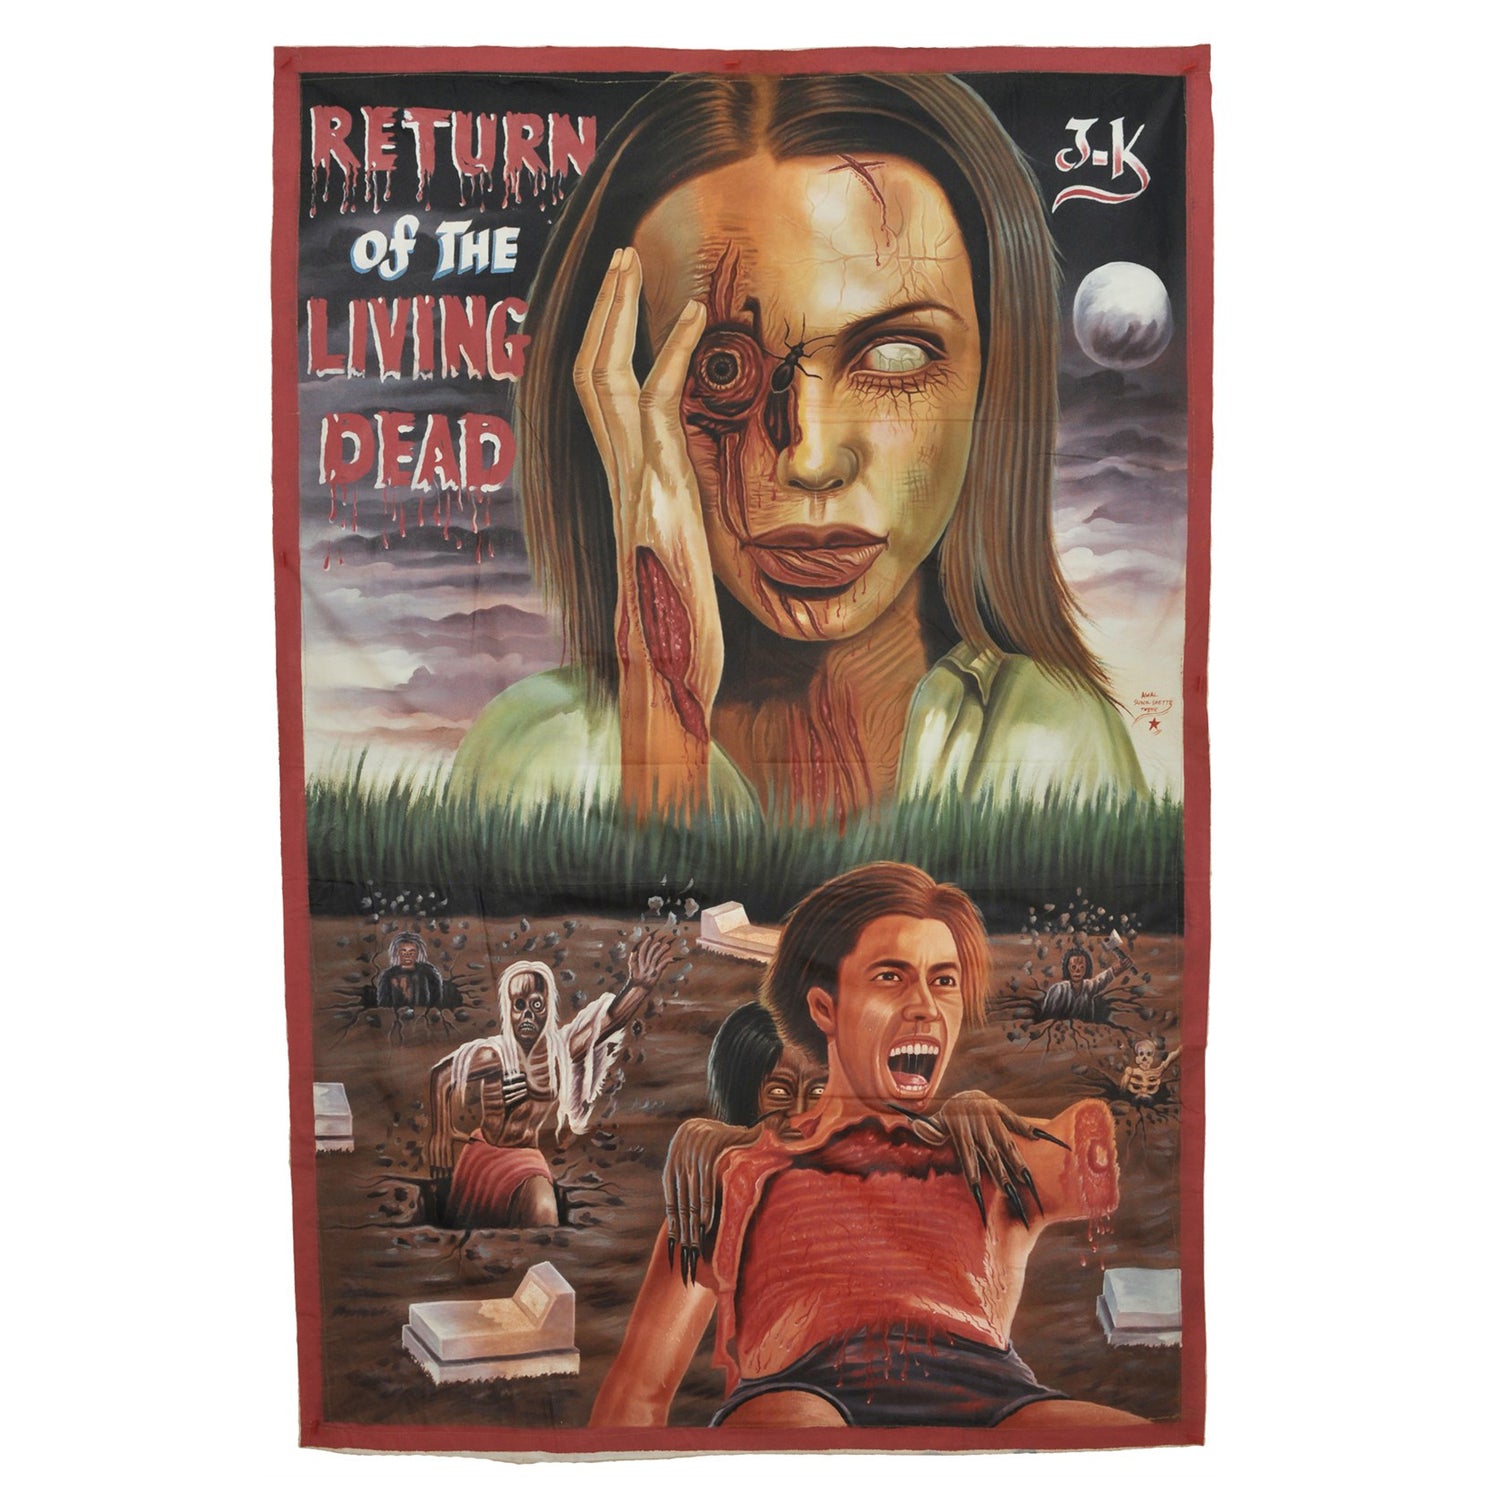 RETURN OF THE LIVING DEAD  MOVIE POSTER HAND PAINTED IN GHANA FOR THE LOCAL CINEMA ART